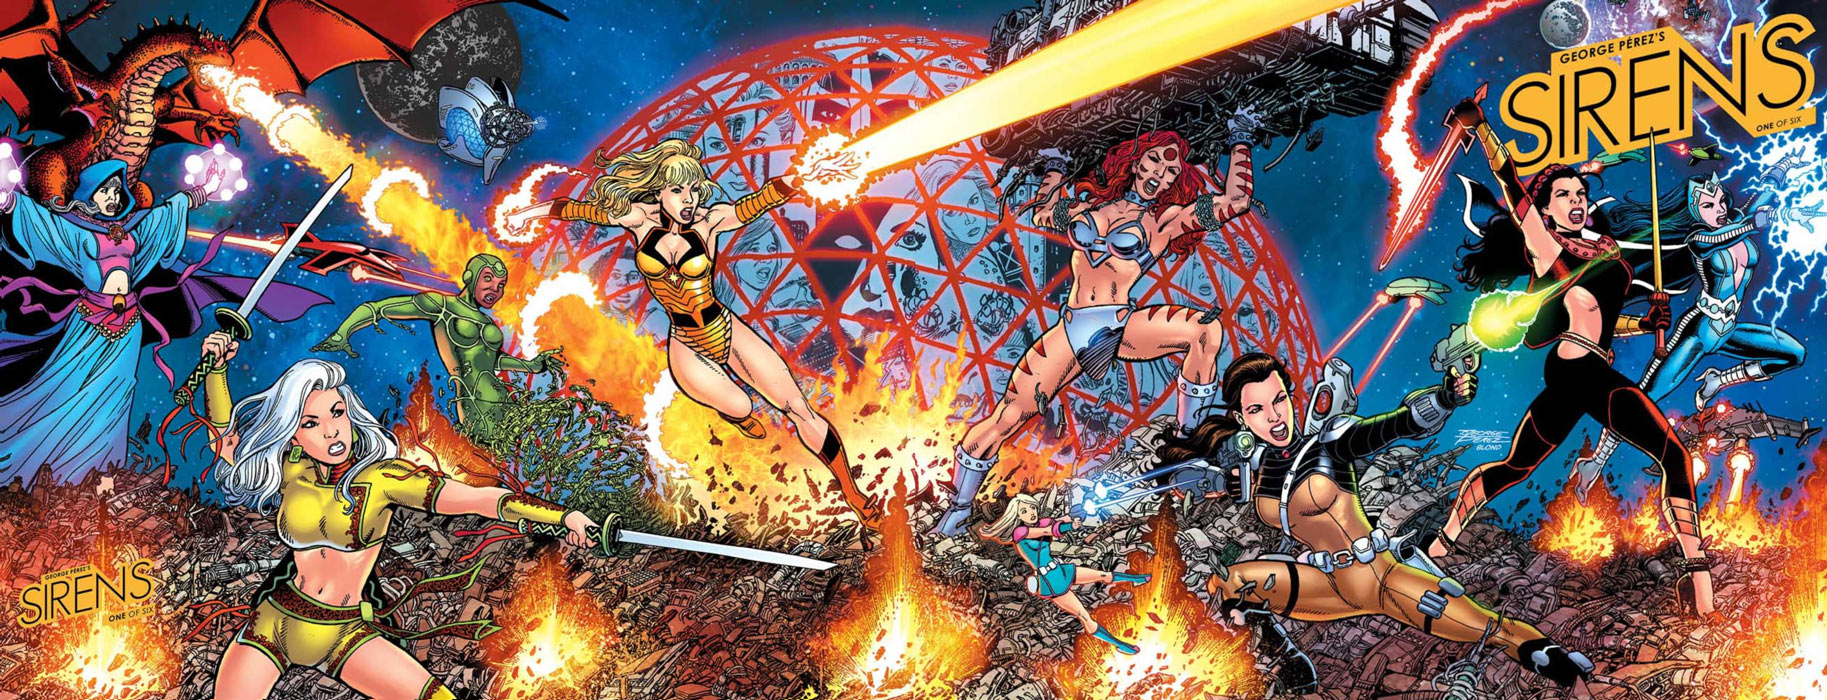 GEORGE PÉREZ'S SIRENS #1 Covers A & C Connected